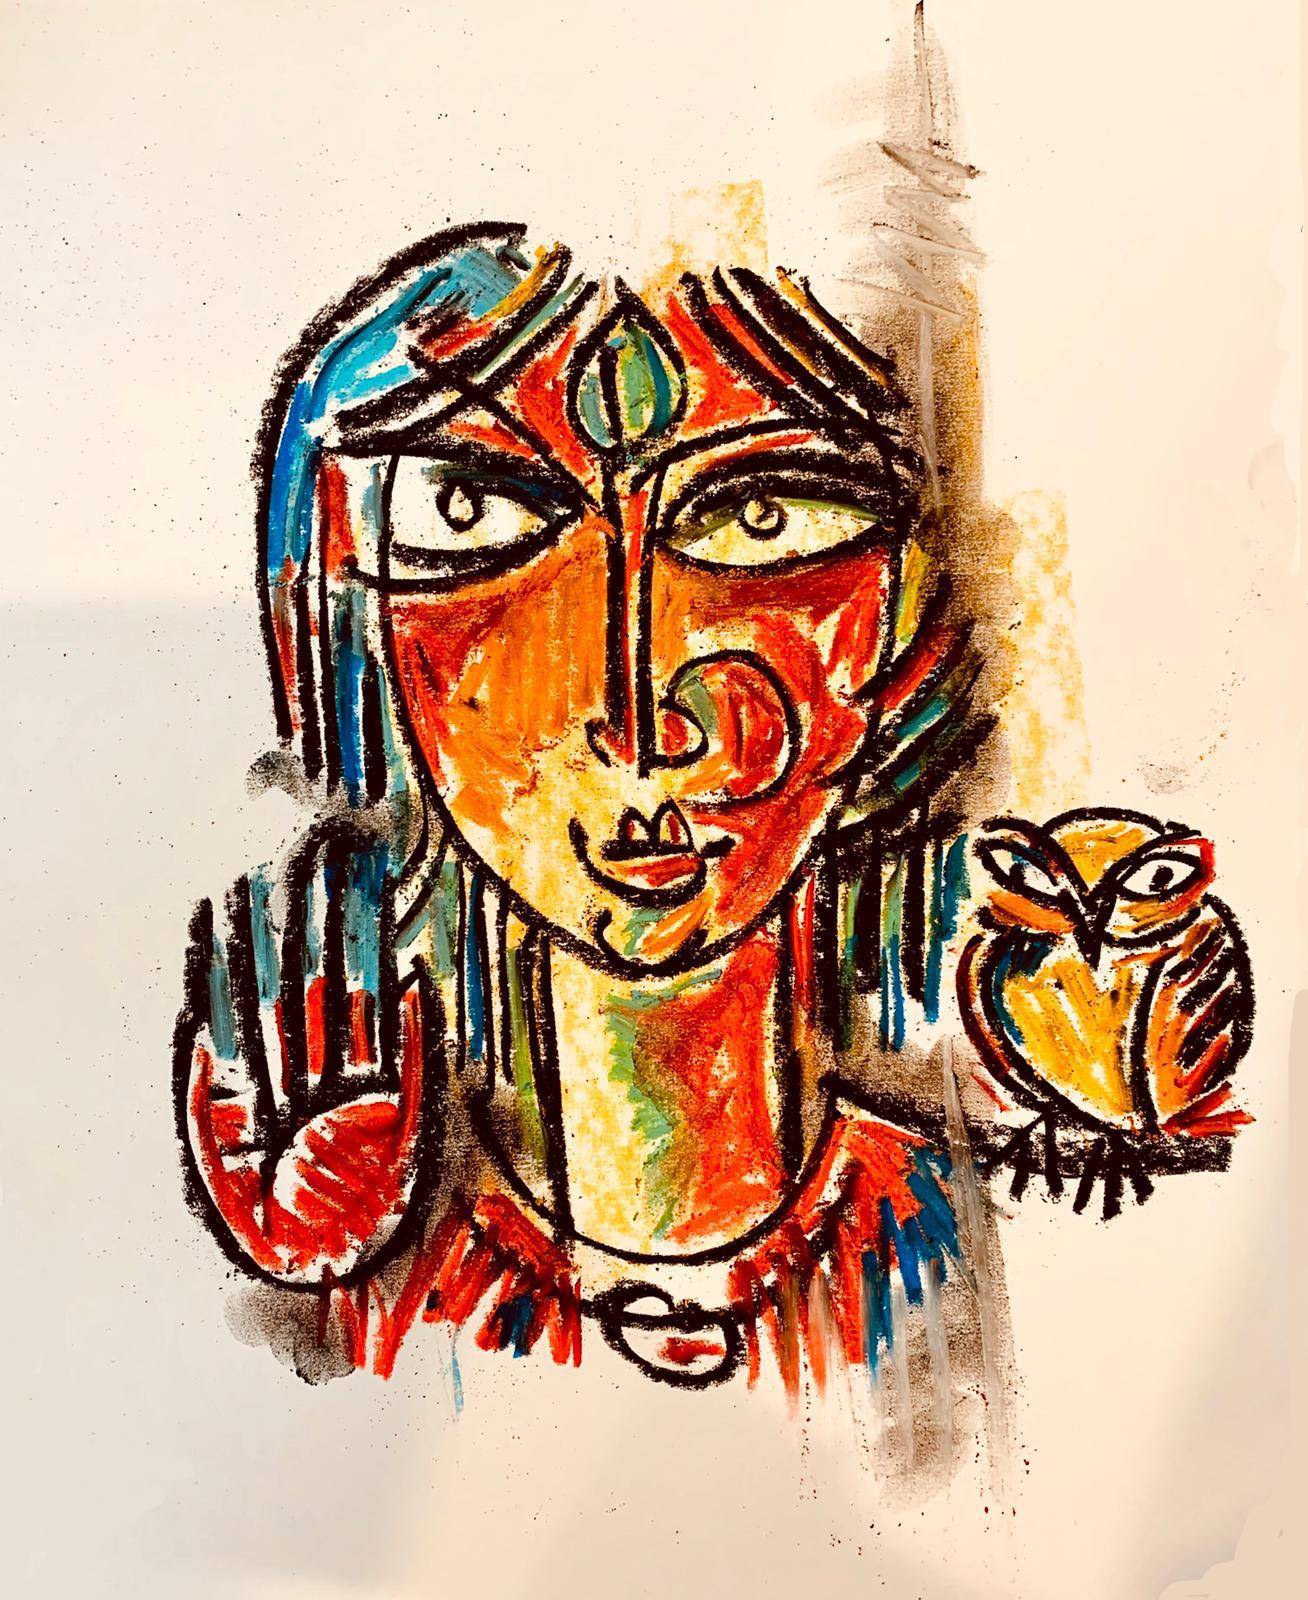 Buy Blessings Painting the original Matted Charcoal and Pastel on Paper artwork by Indian-American artist Gopaal Seyn | RedBlueArts.com